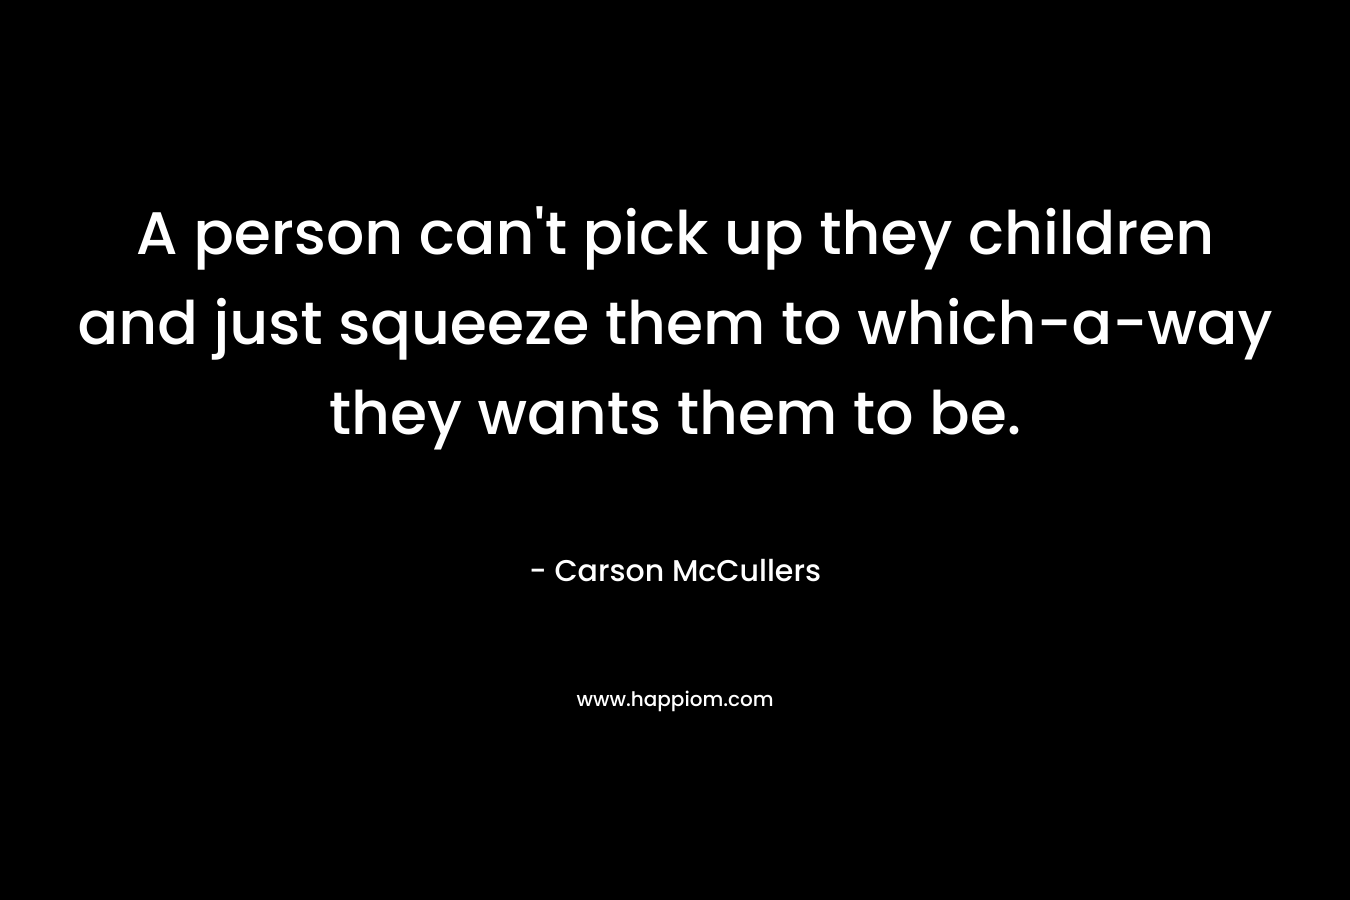 A person can’t pick up they children and just squeeze them to which-a-way they wants them to be. – Carson McCullers